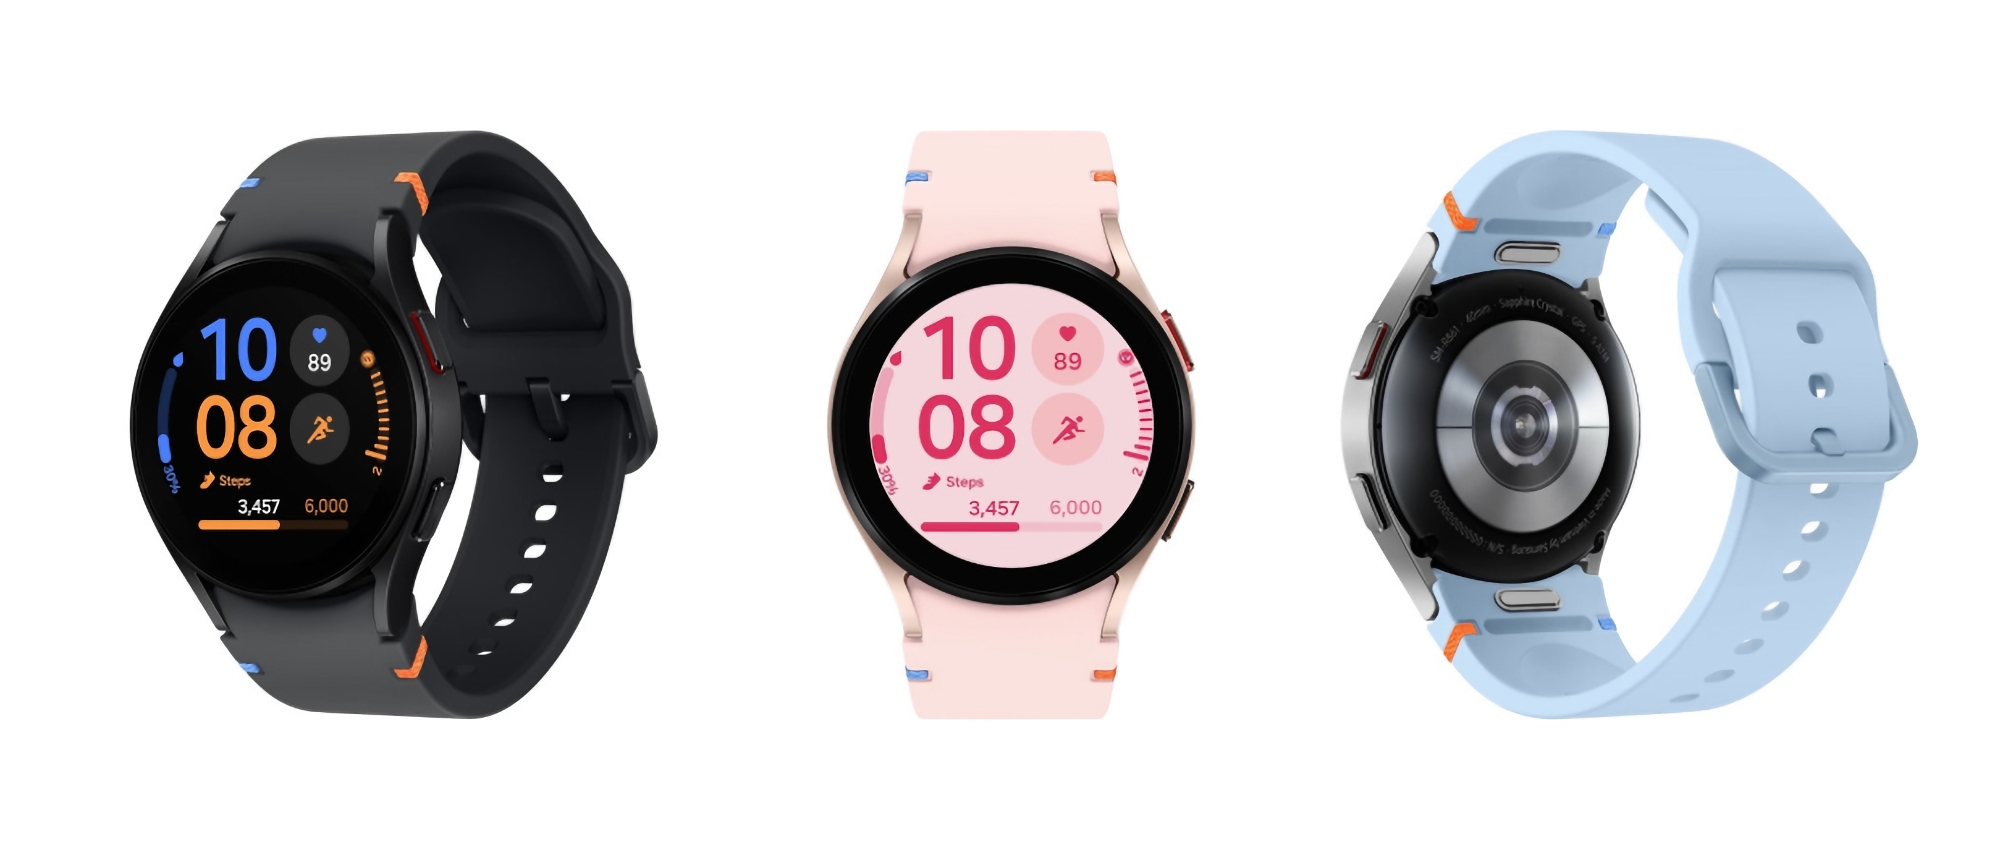 The Samsung Galaxy Watch FE is already available to order in the Netherlands for €219